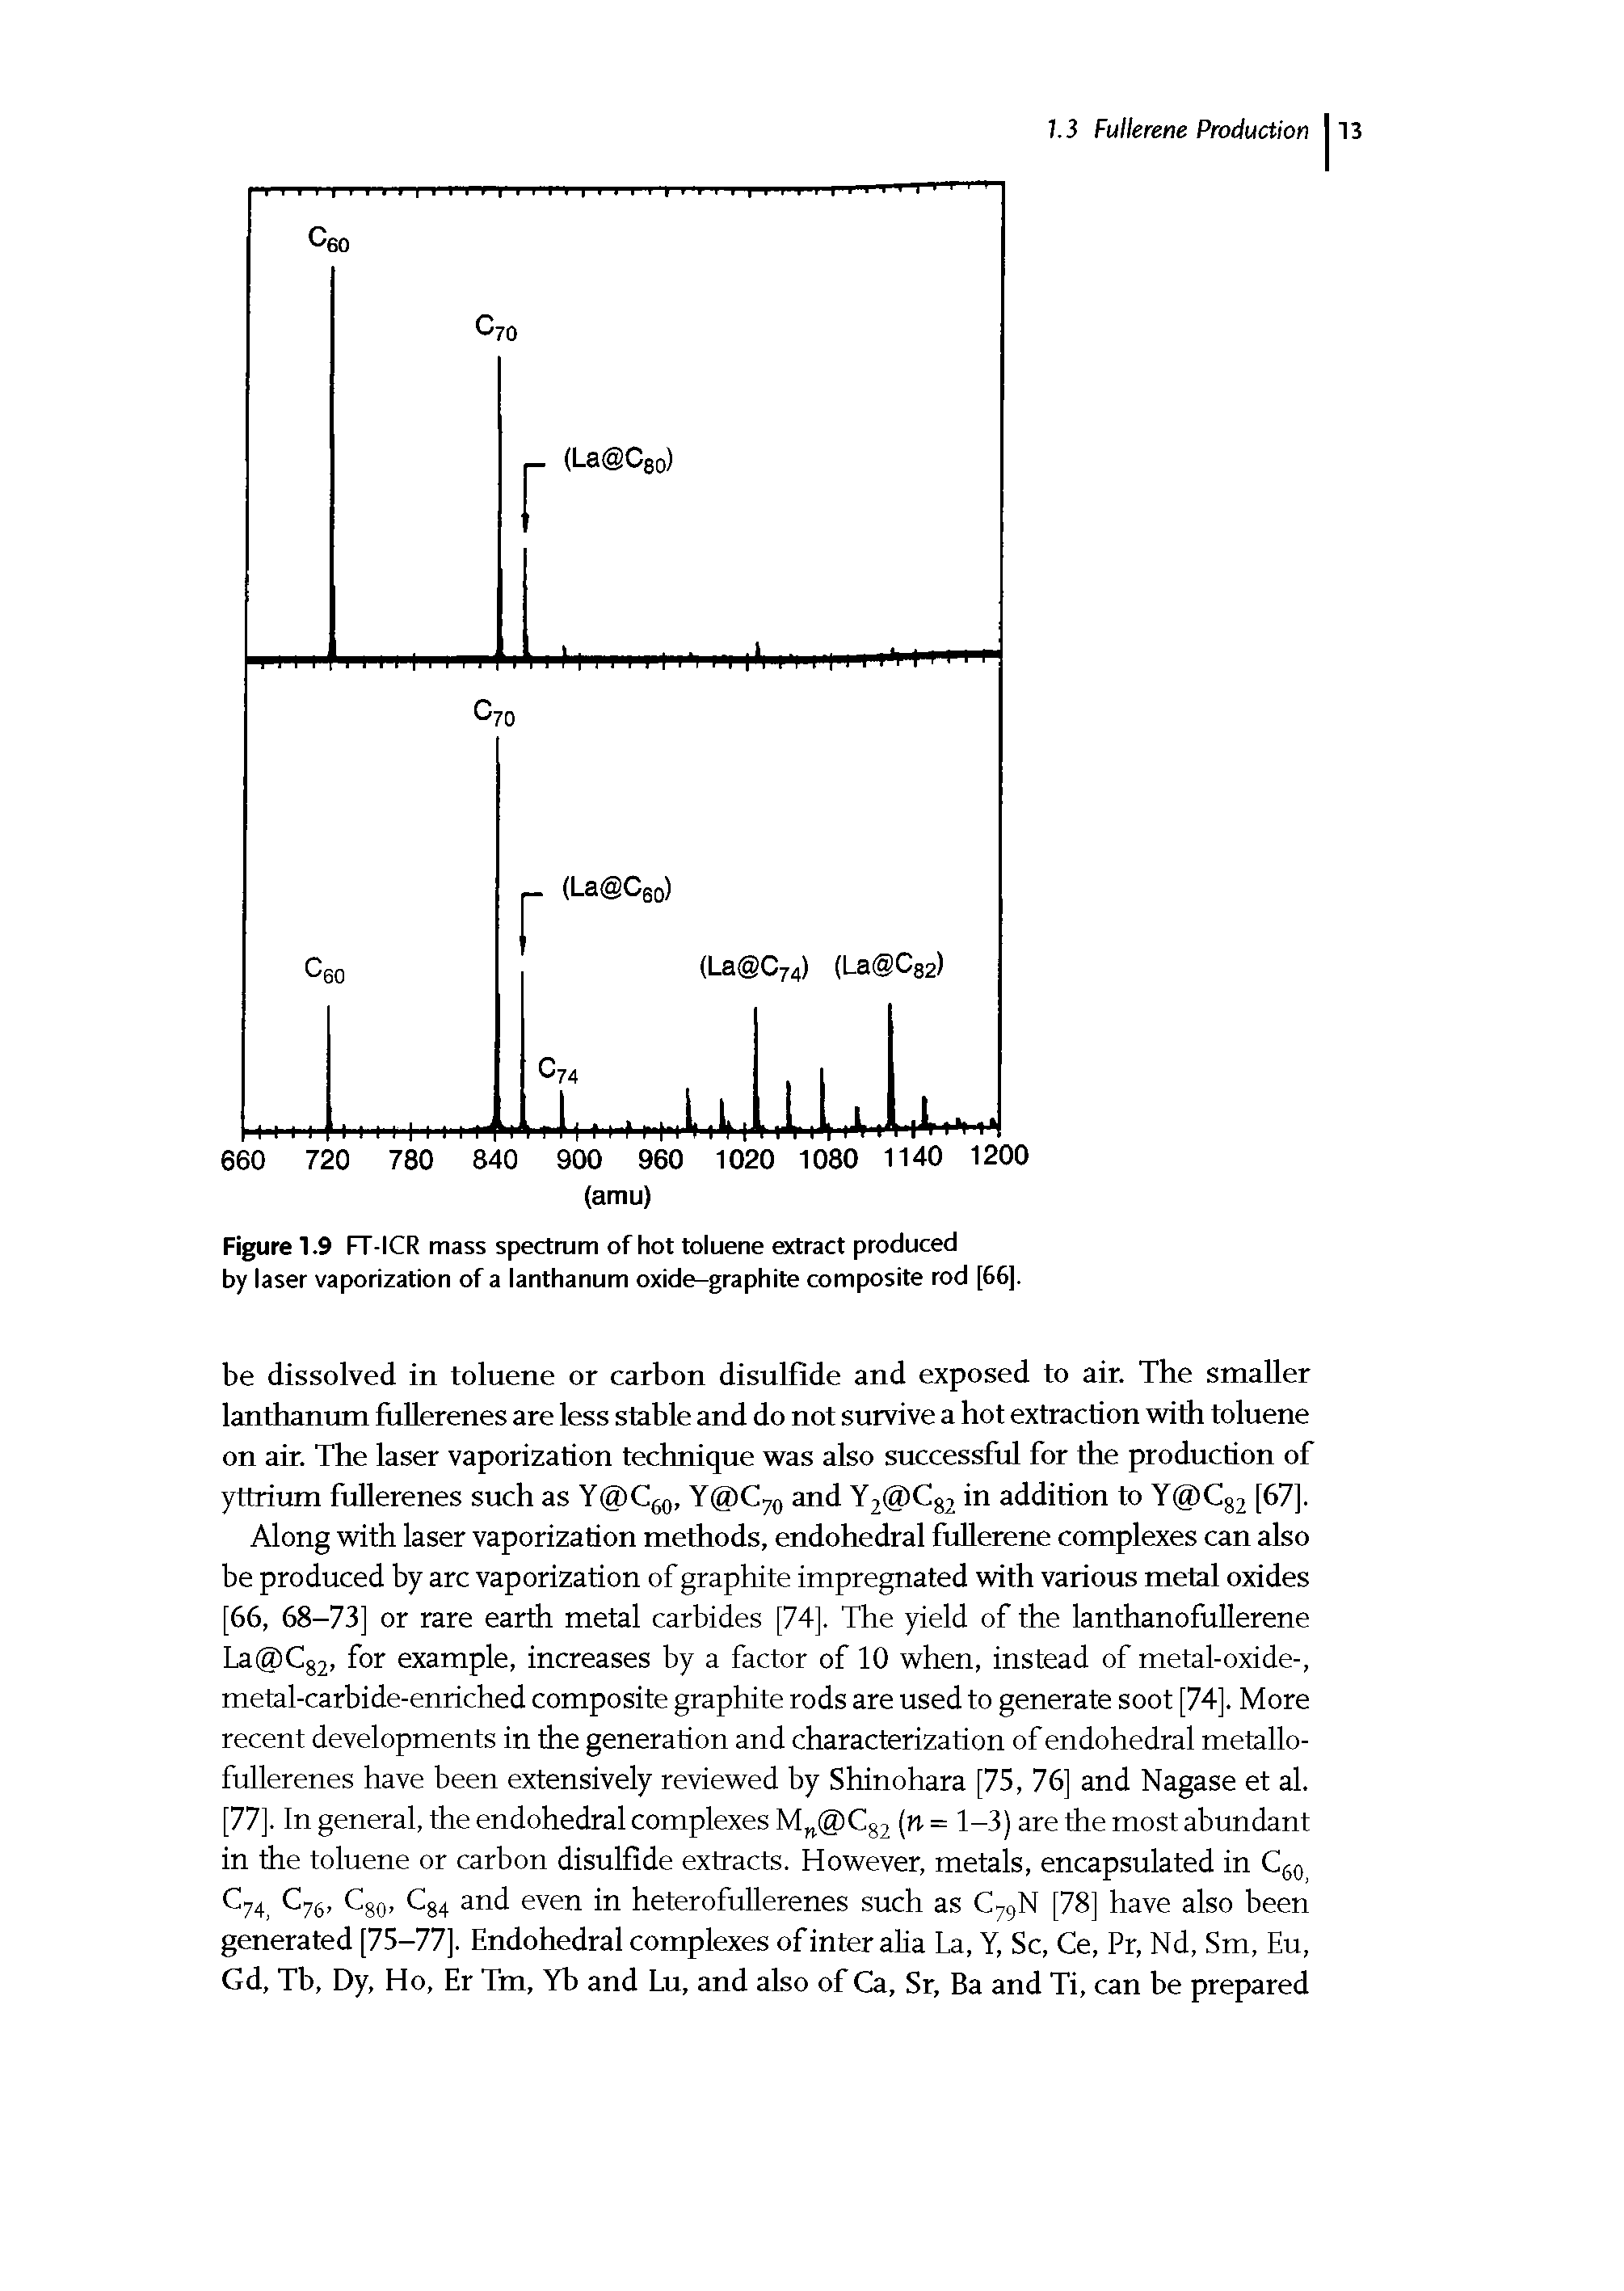 Figure 1.9 FT-ICR mass spectrum of hot toluene extract produced by laser vaporization of a lanthanum oxide-graphite composite rod [66].